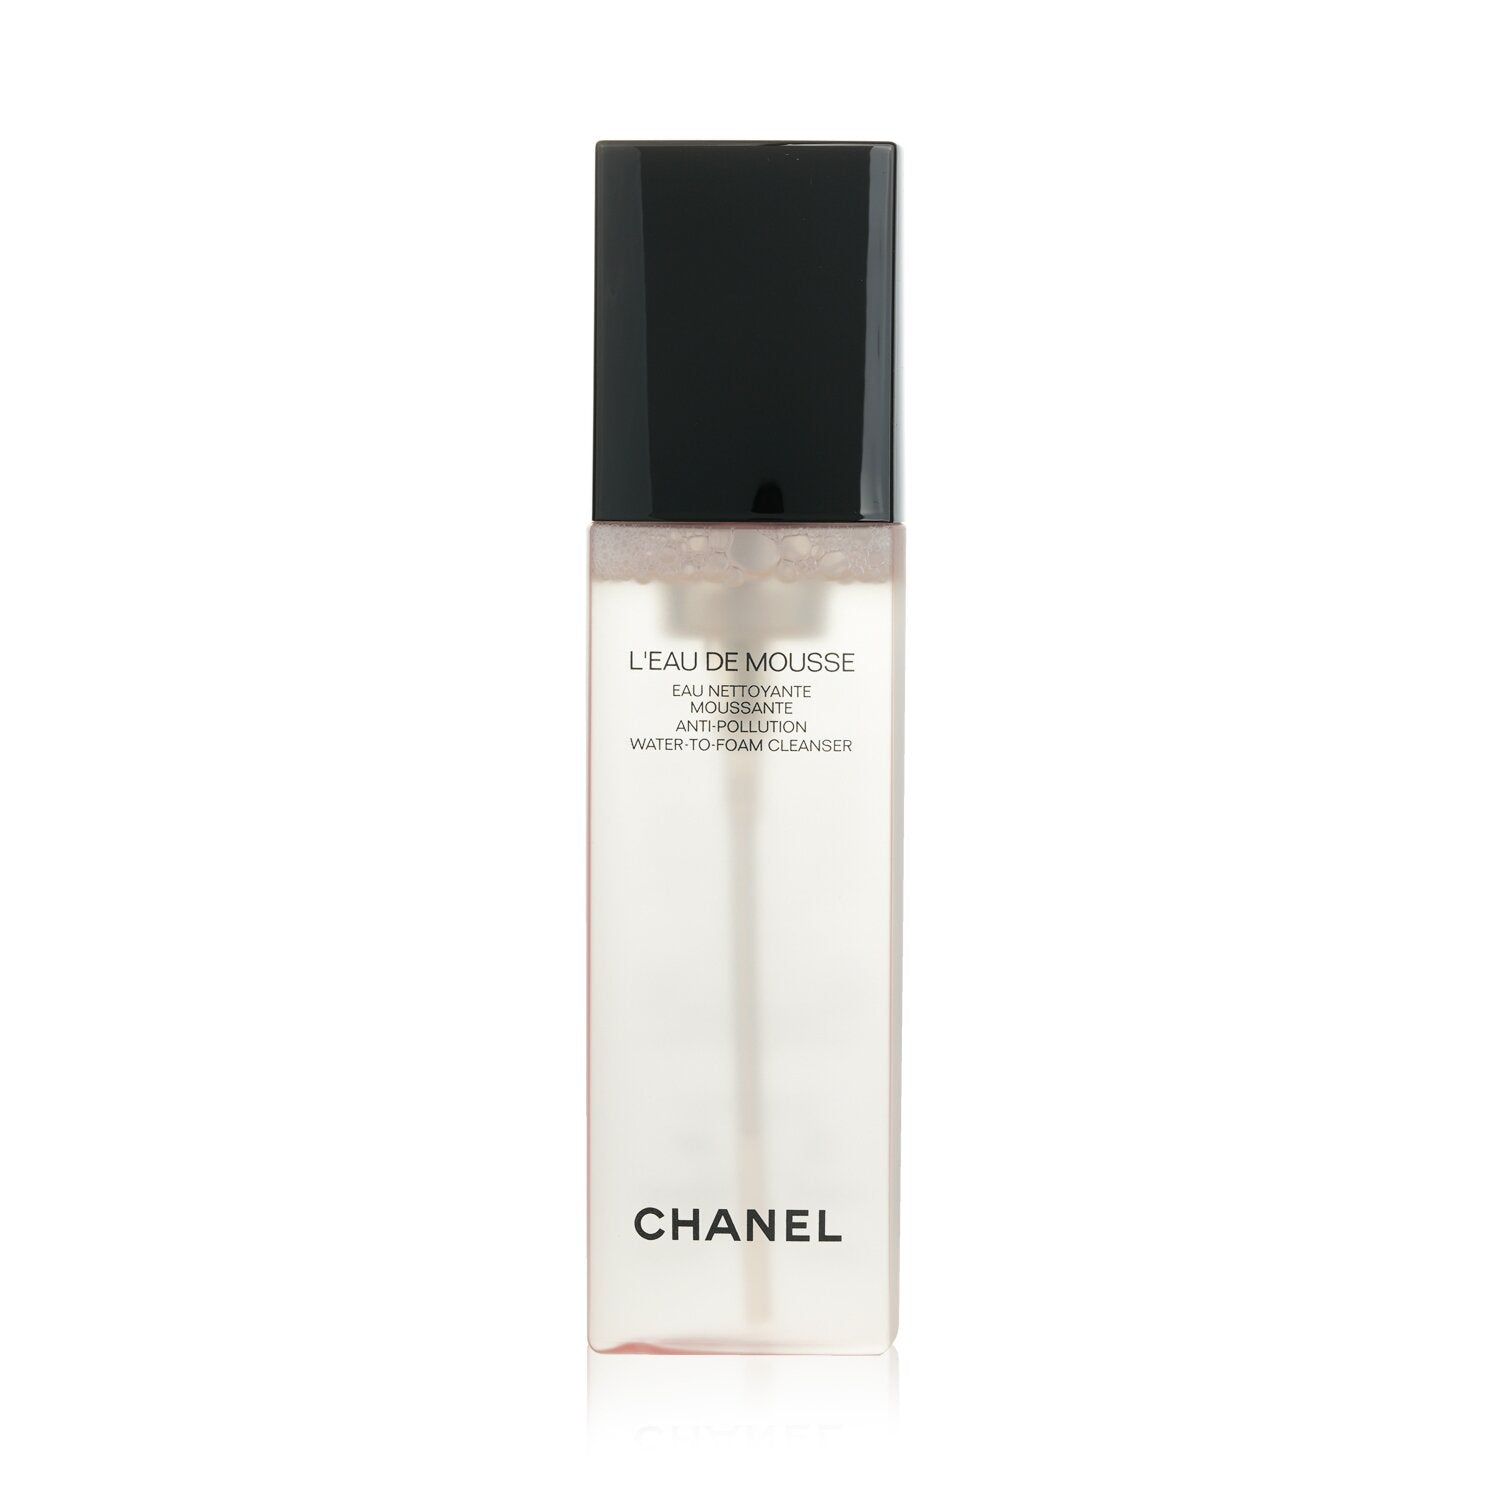 CHANEL La Mousse Cleansing Cream-to-Foam Facial Cleanser 5ml